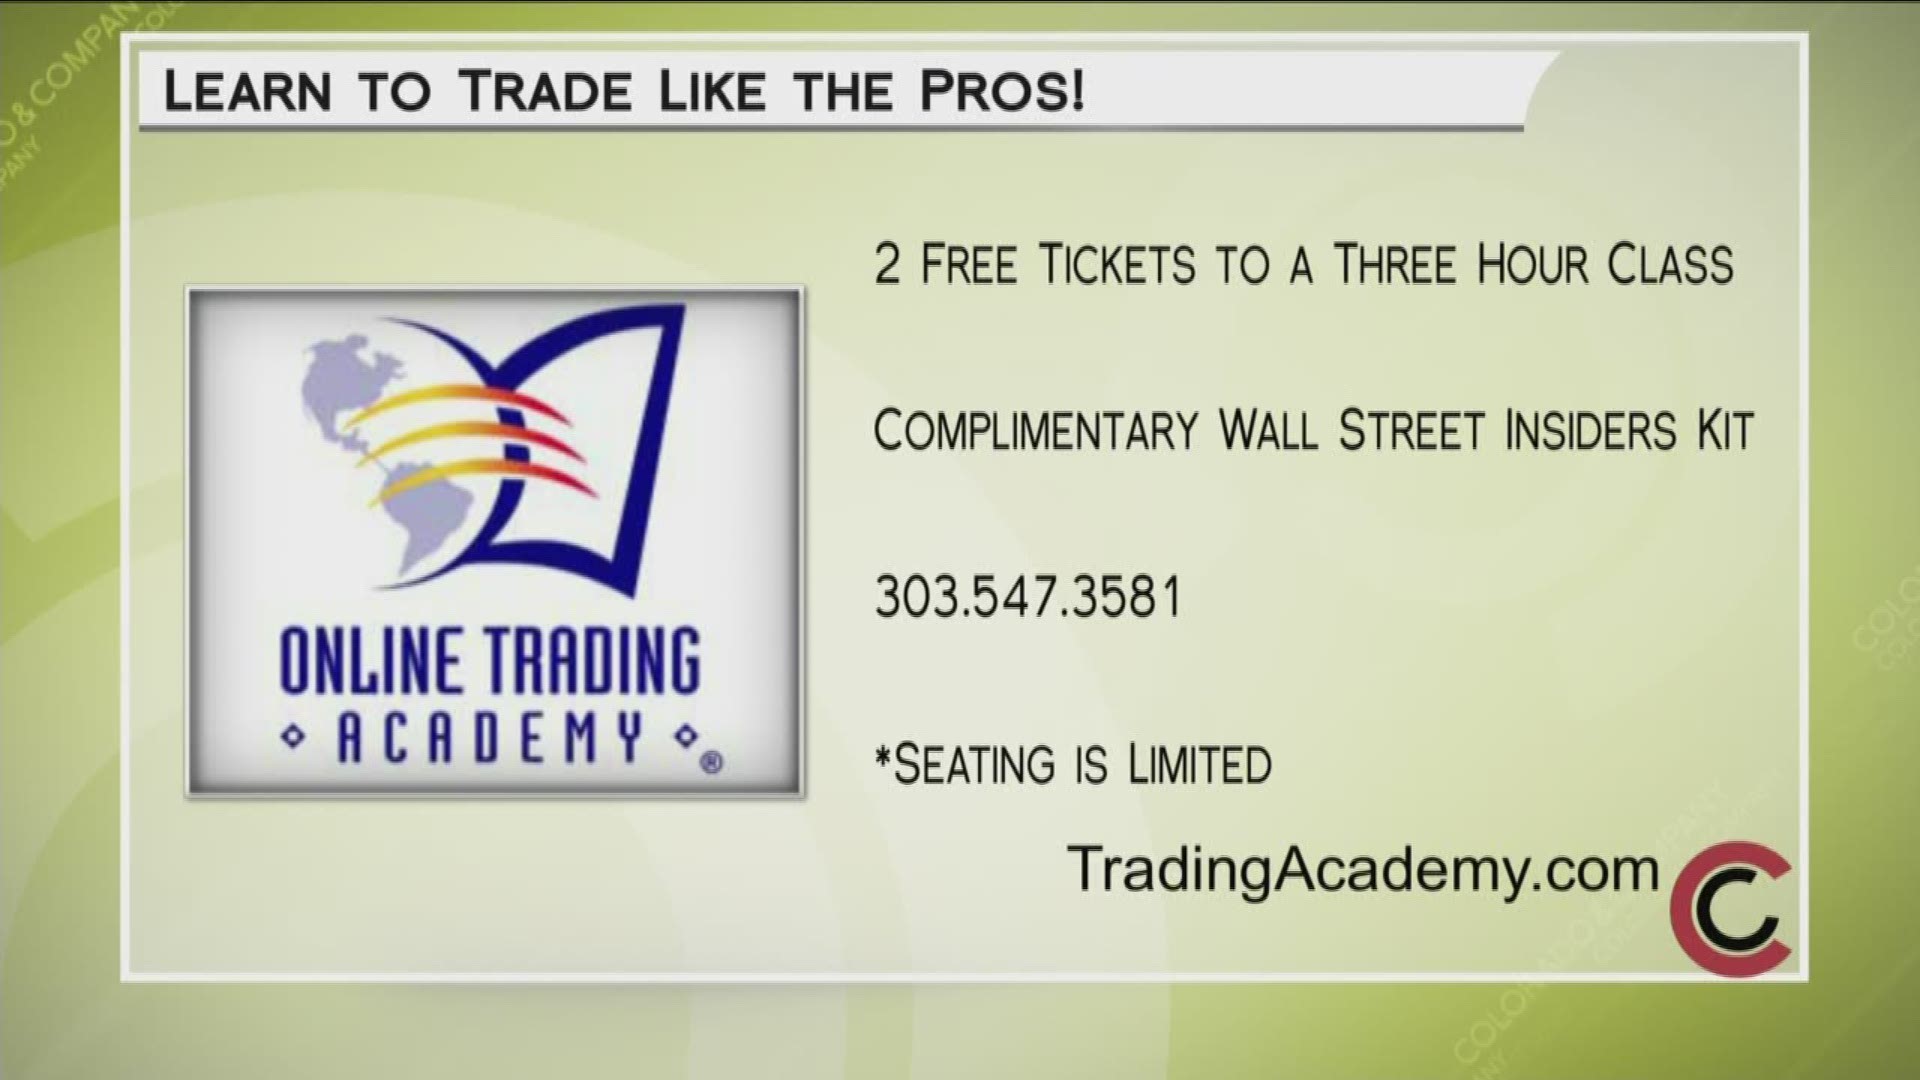 Learn to invest and trade like the pros with Online Trading Academy. Call 303.547.3581 or visit TradingAcademy.com for more info on free tickets to a 3-hour class!